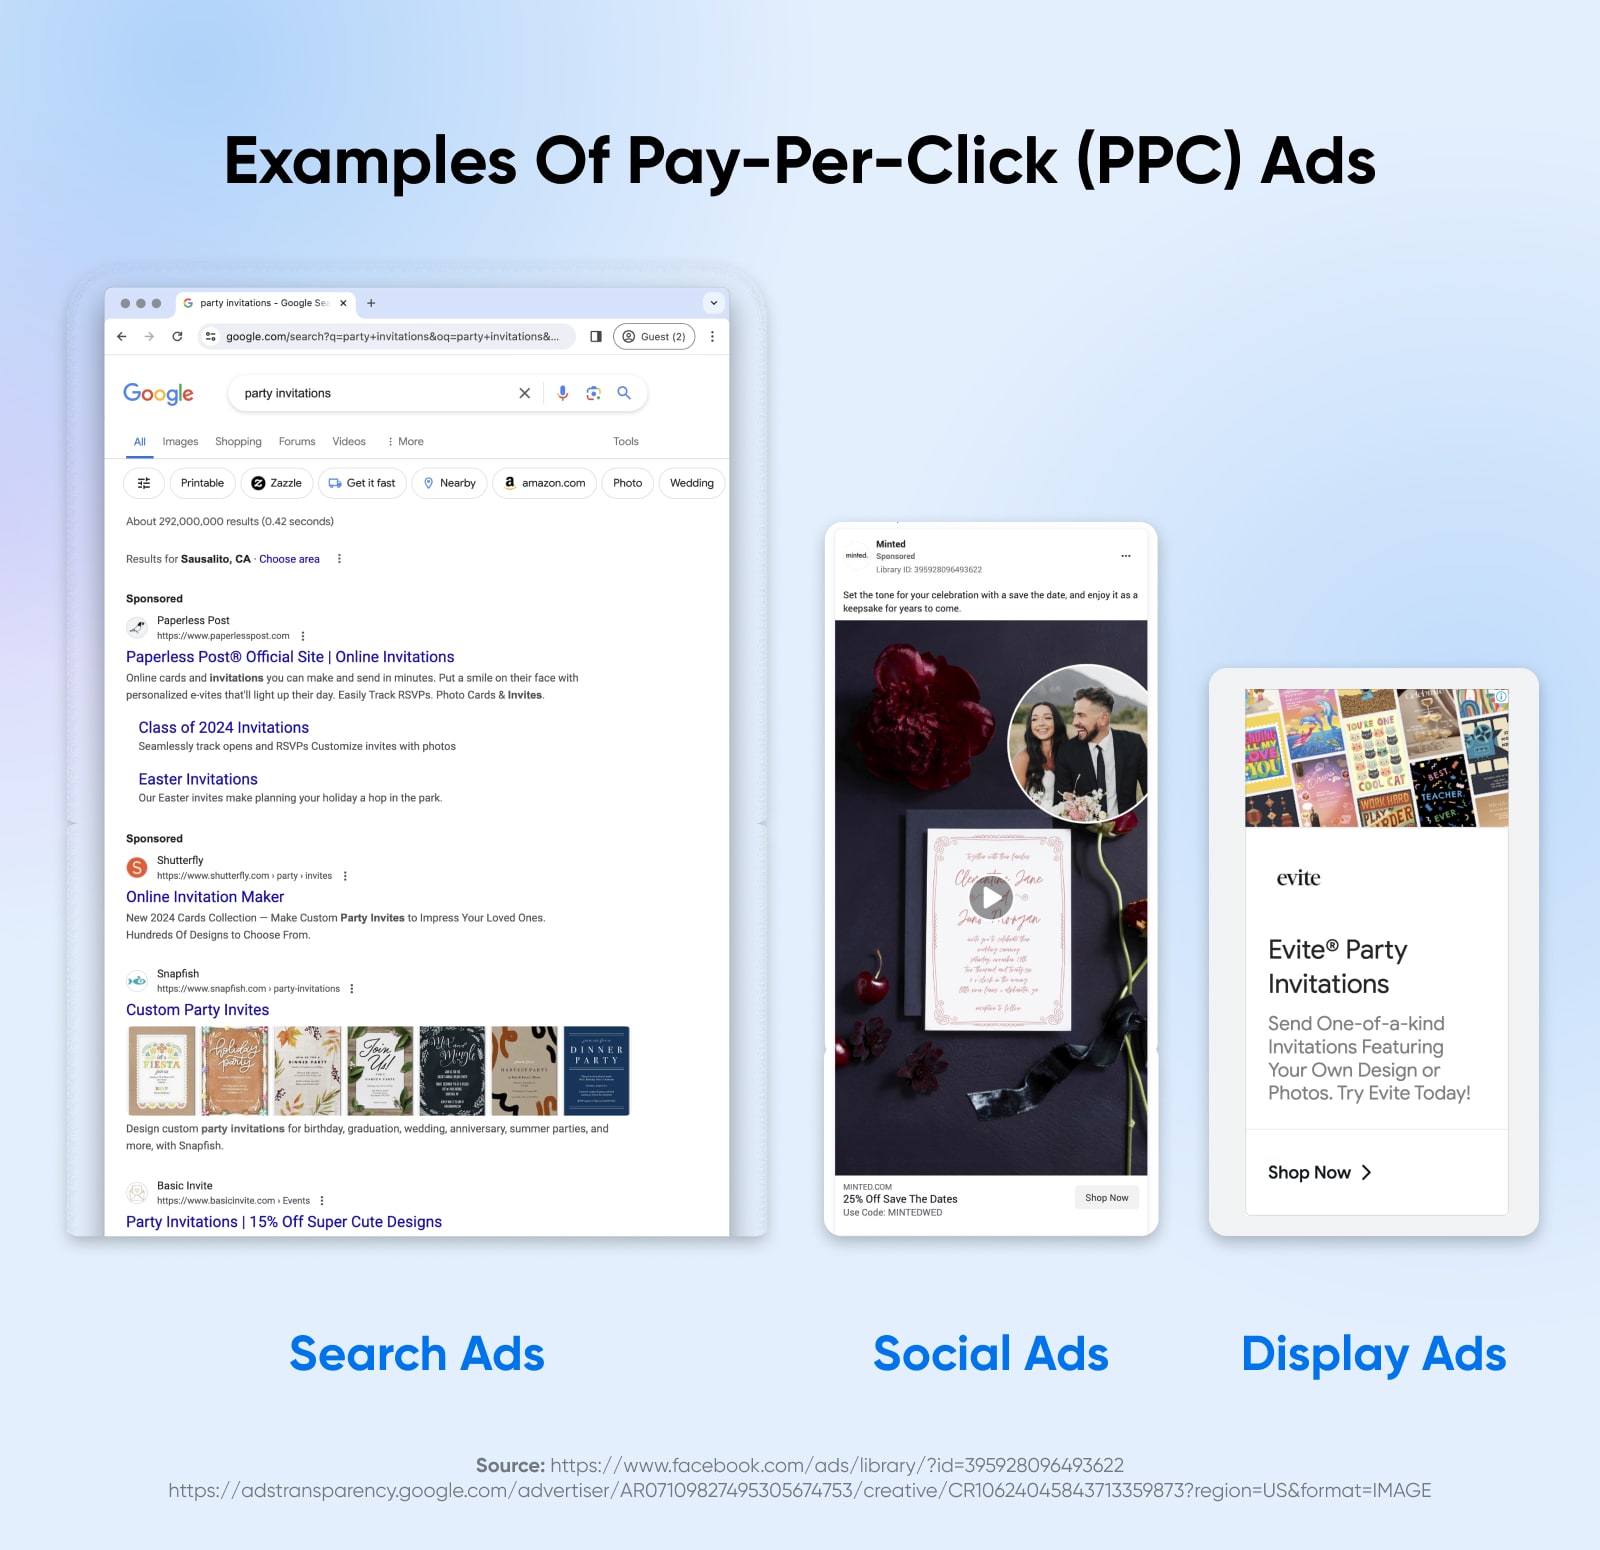 Examples of search ads, social ads, and display ads appear side-by-side on different devices. 